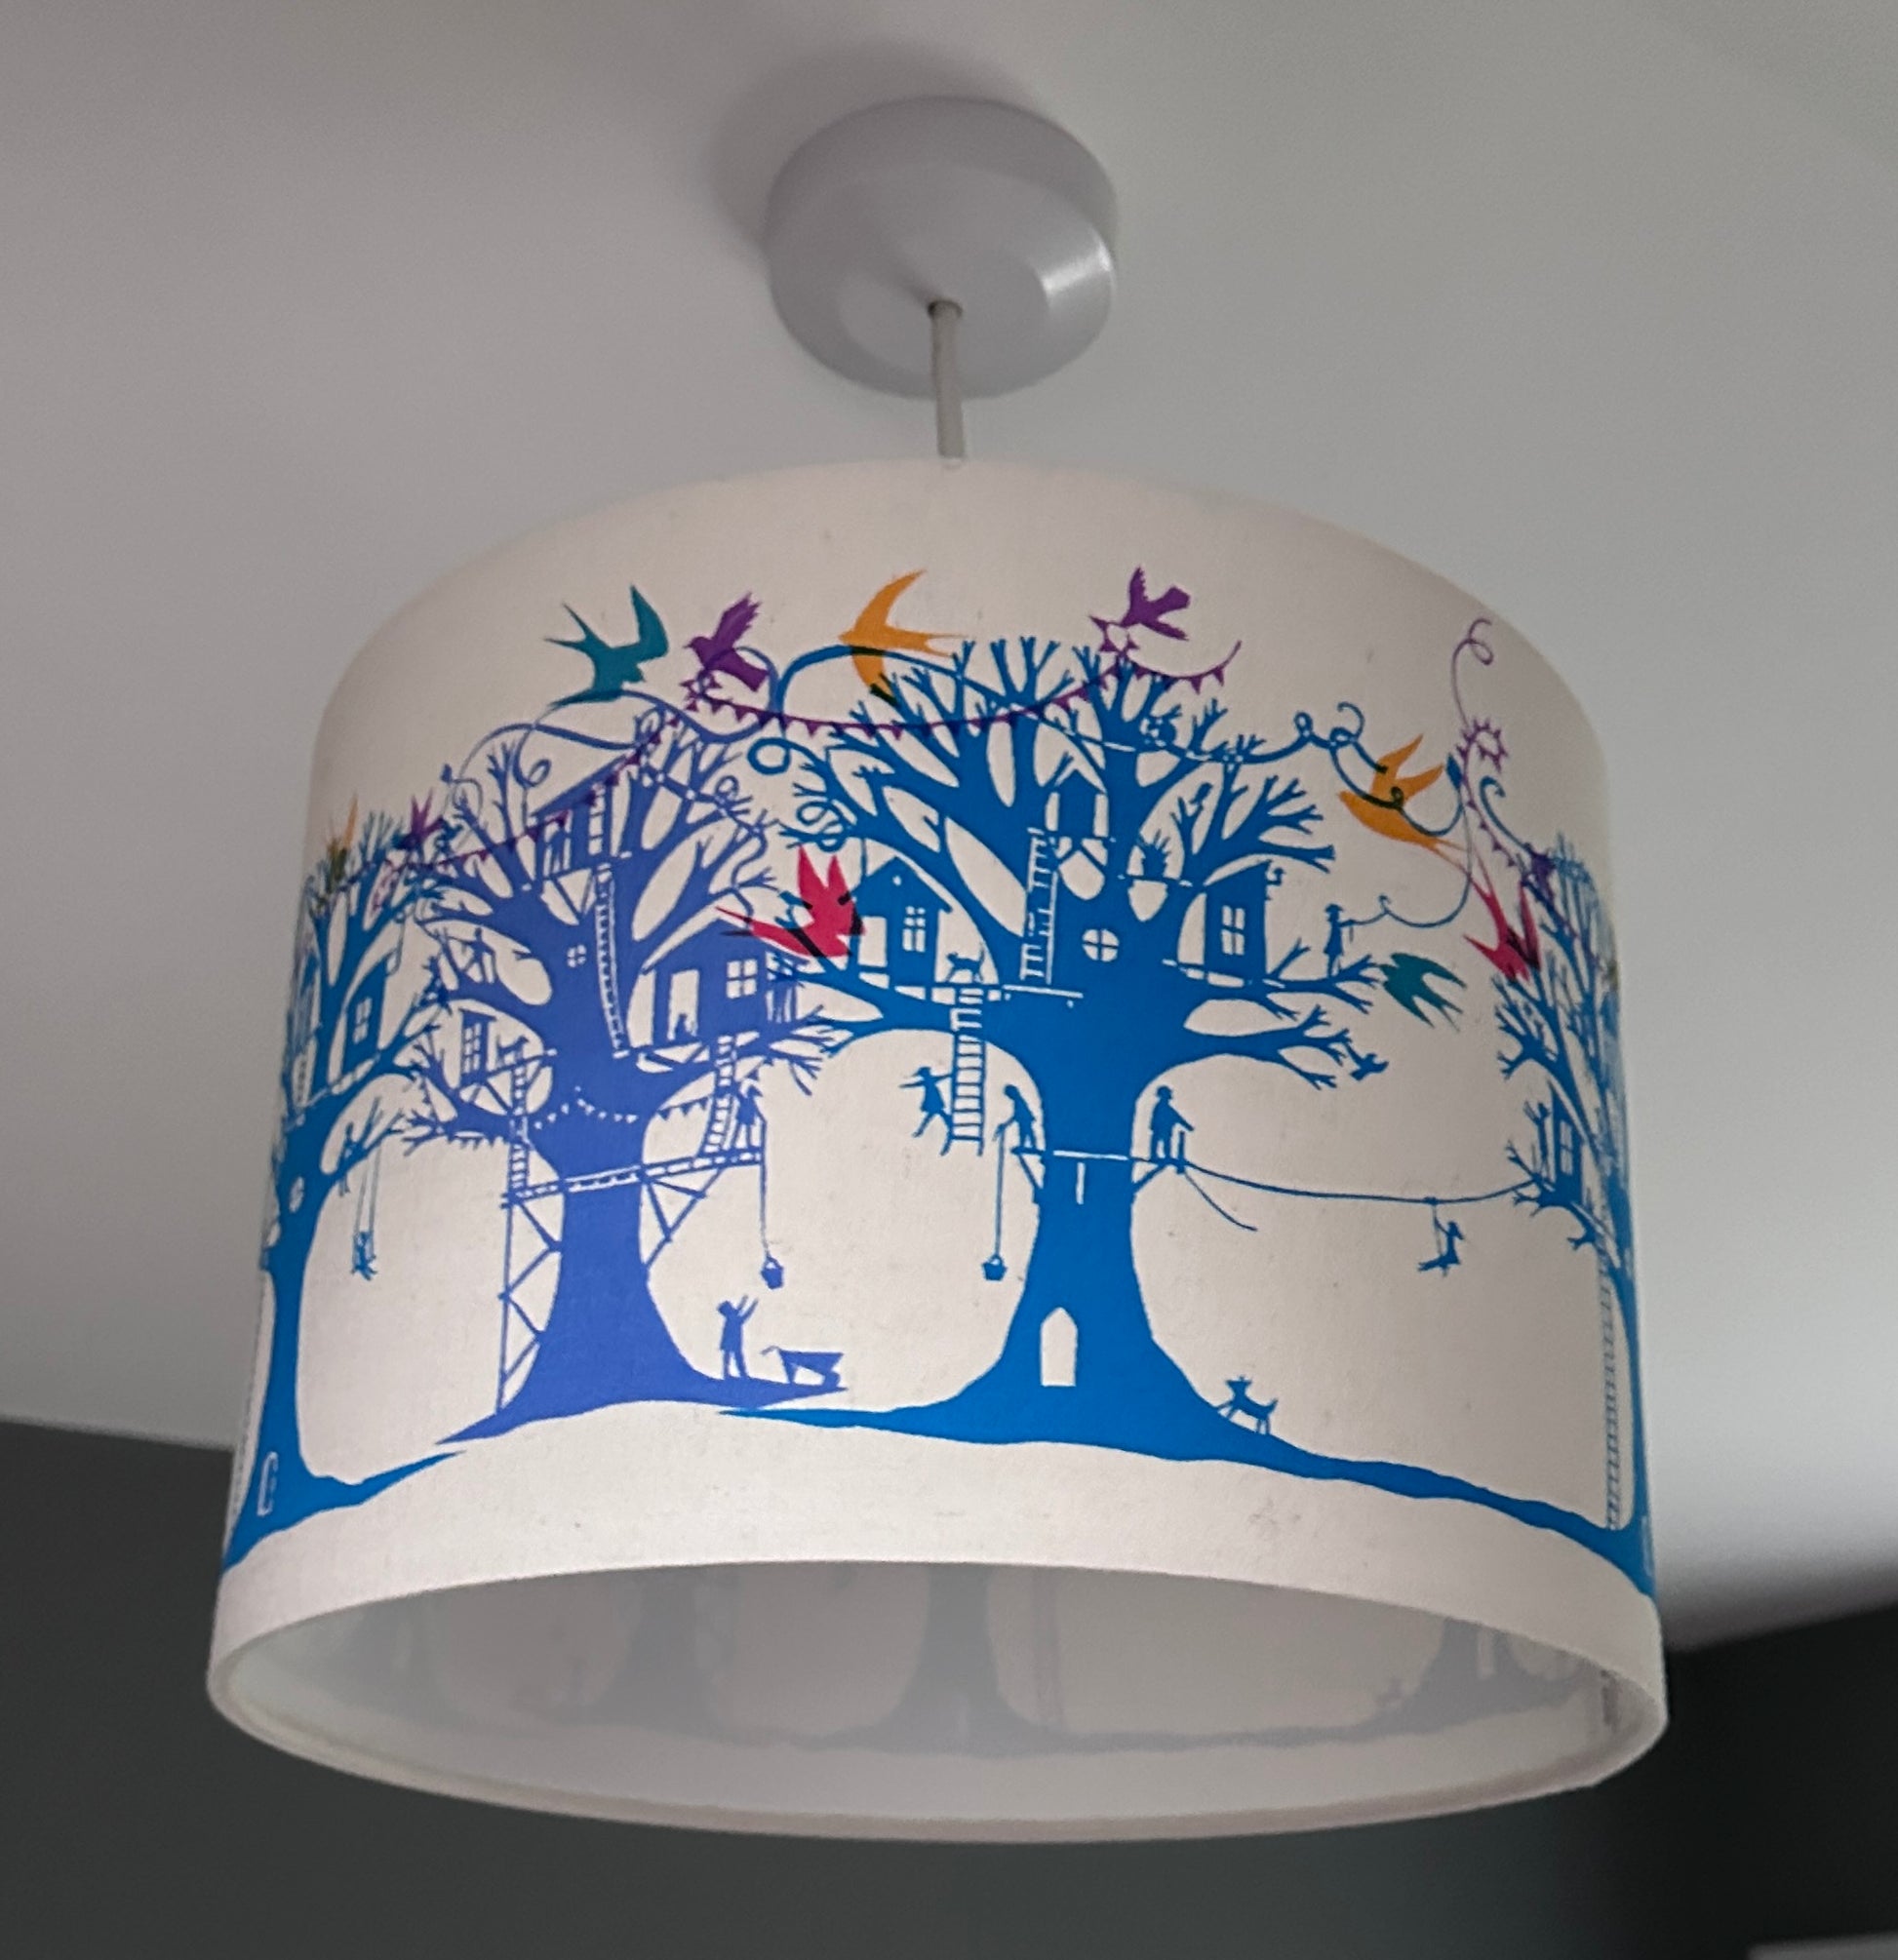 Ceiling lampshade with blue and turquoise  trees with treehouses on cream background with multi coloured birds and bunting.